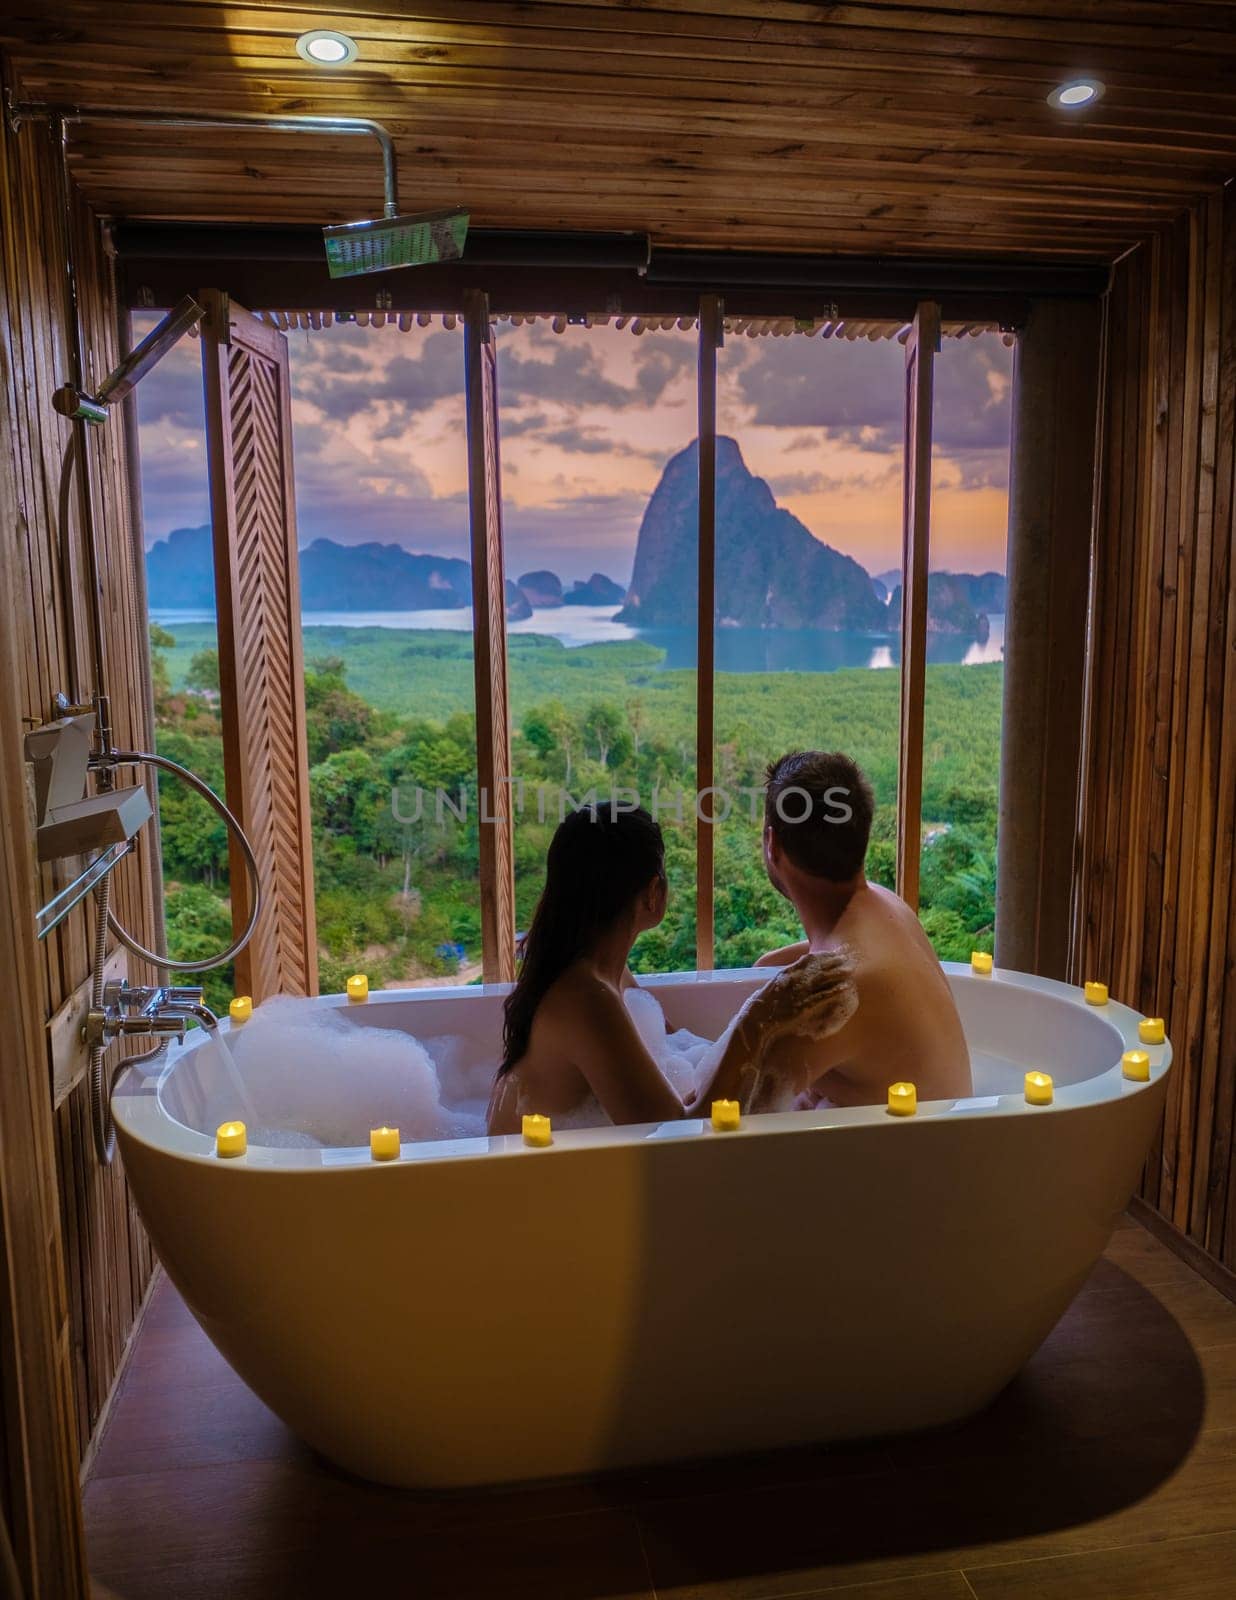 A couple of men and a woman in a bathtub looking at the sunset over Sametnangshe viewpoint mountains in Phangnga Bay with mangrove forest in the Andaman Sea in Phangnga, Thailand